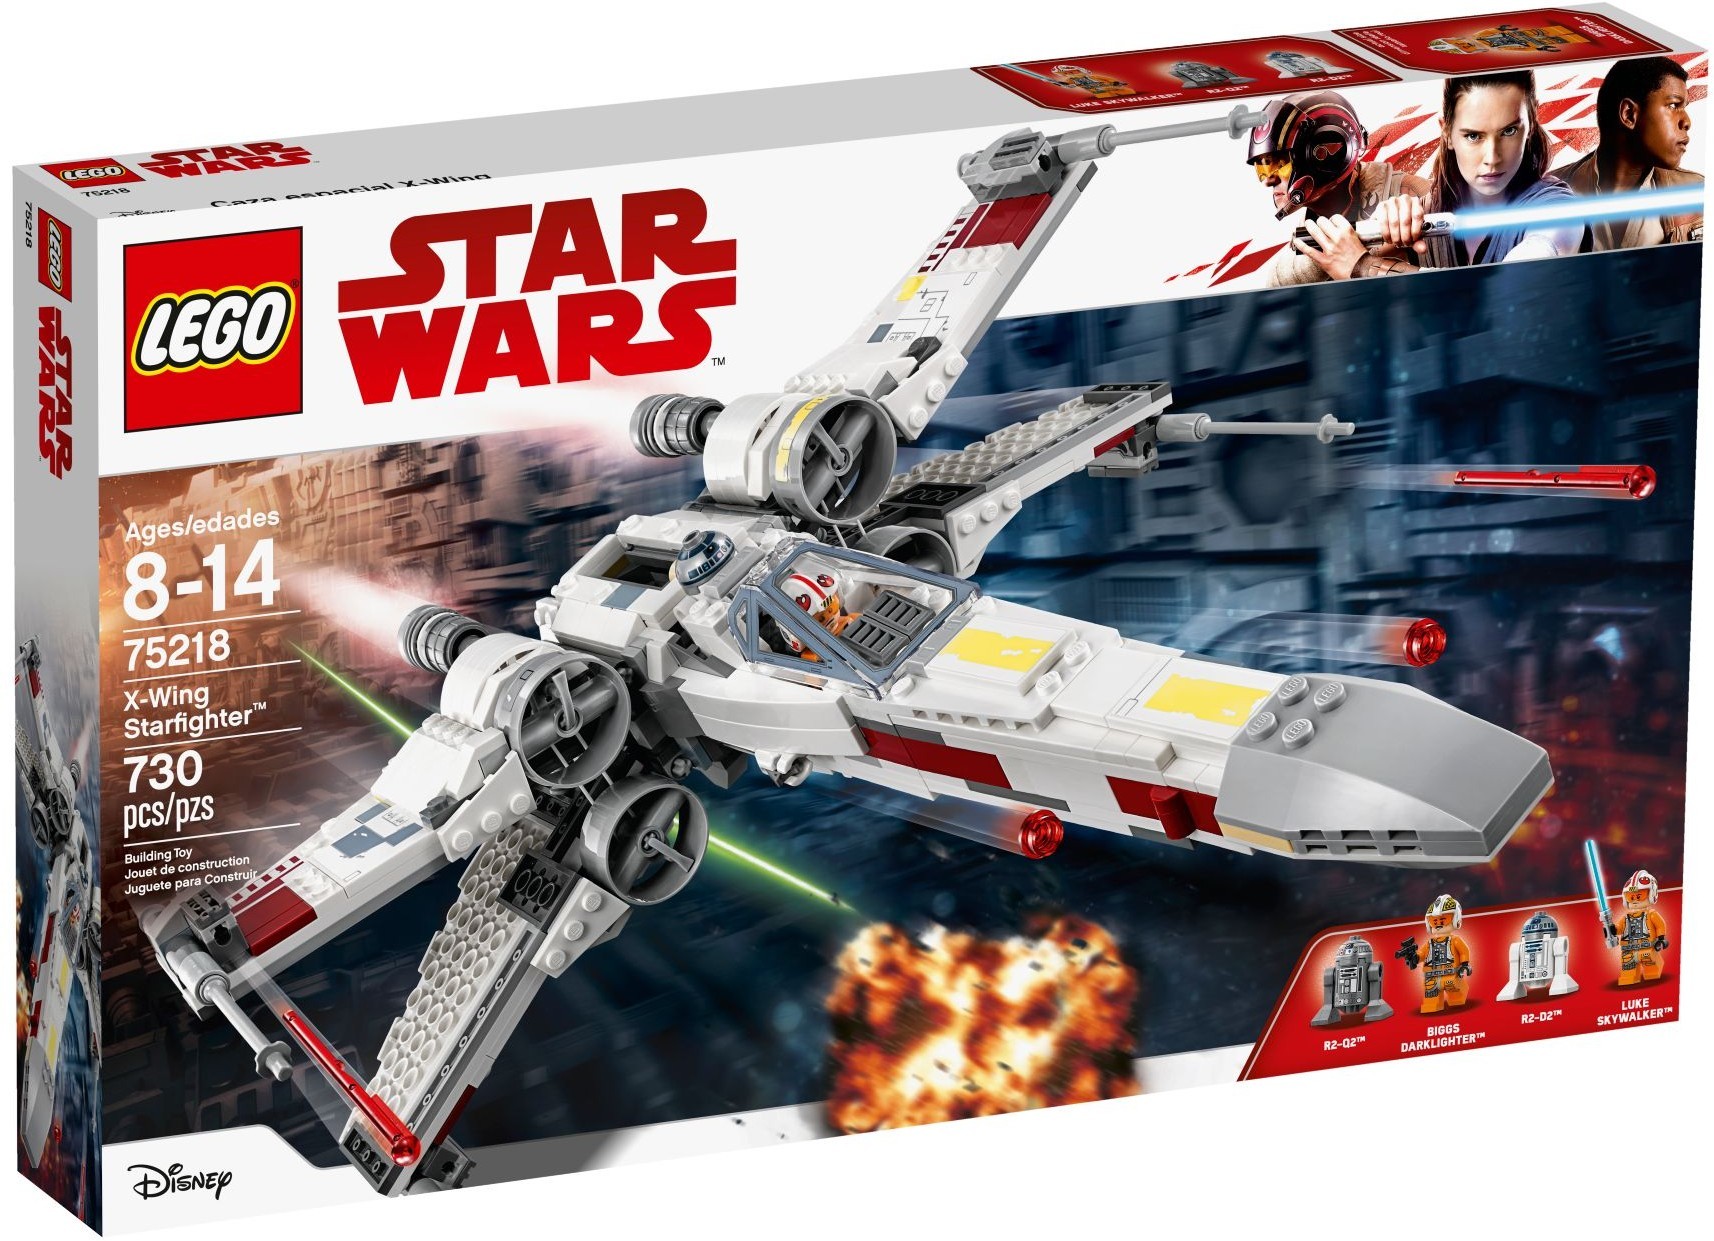 Specific Existence Beloved LEGO Star Wars X-Wing Starfighter (75218) Amazon Sale - August 2019 - The  Brick Fan